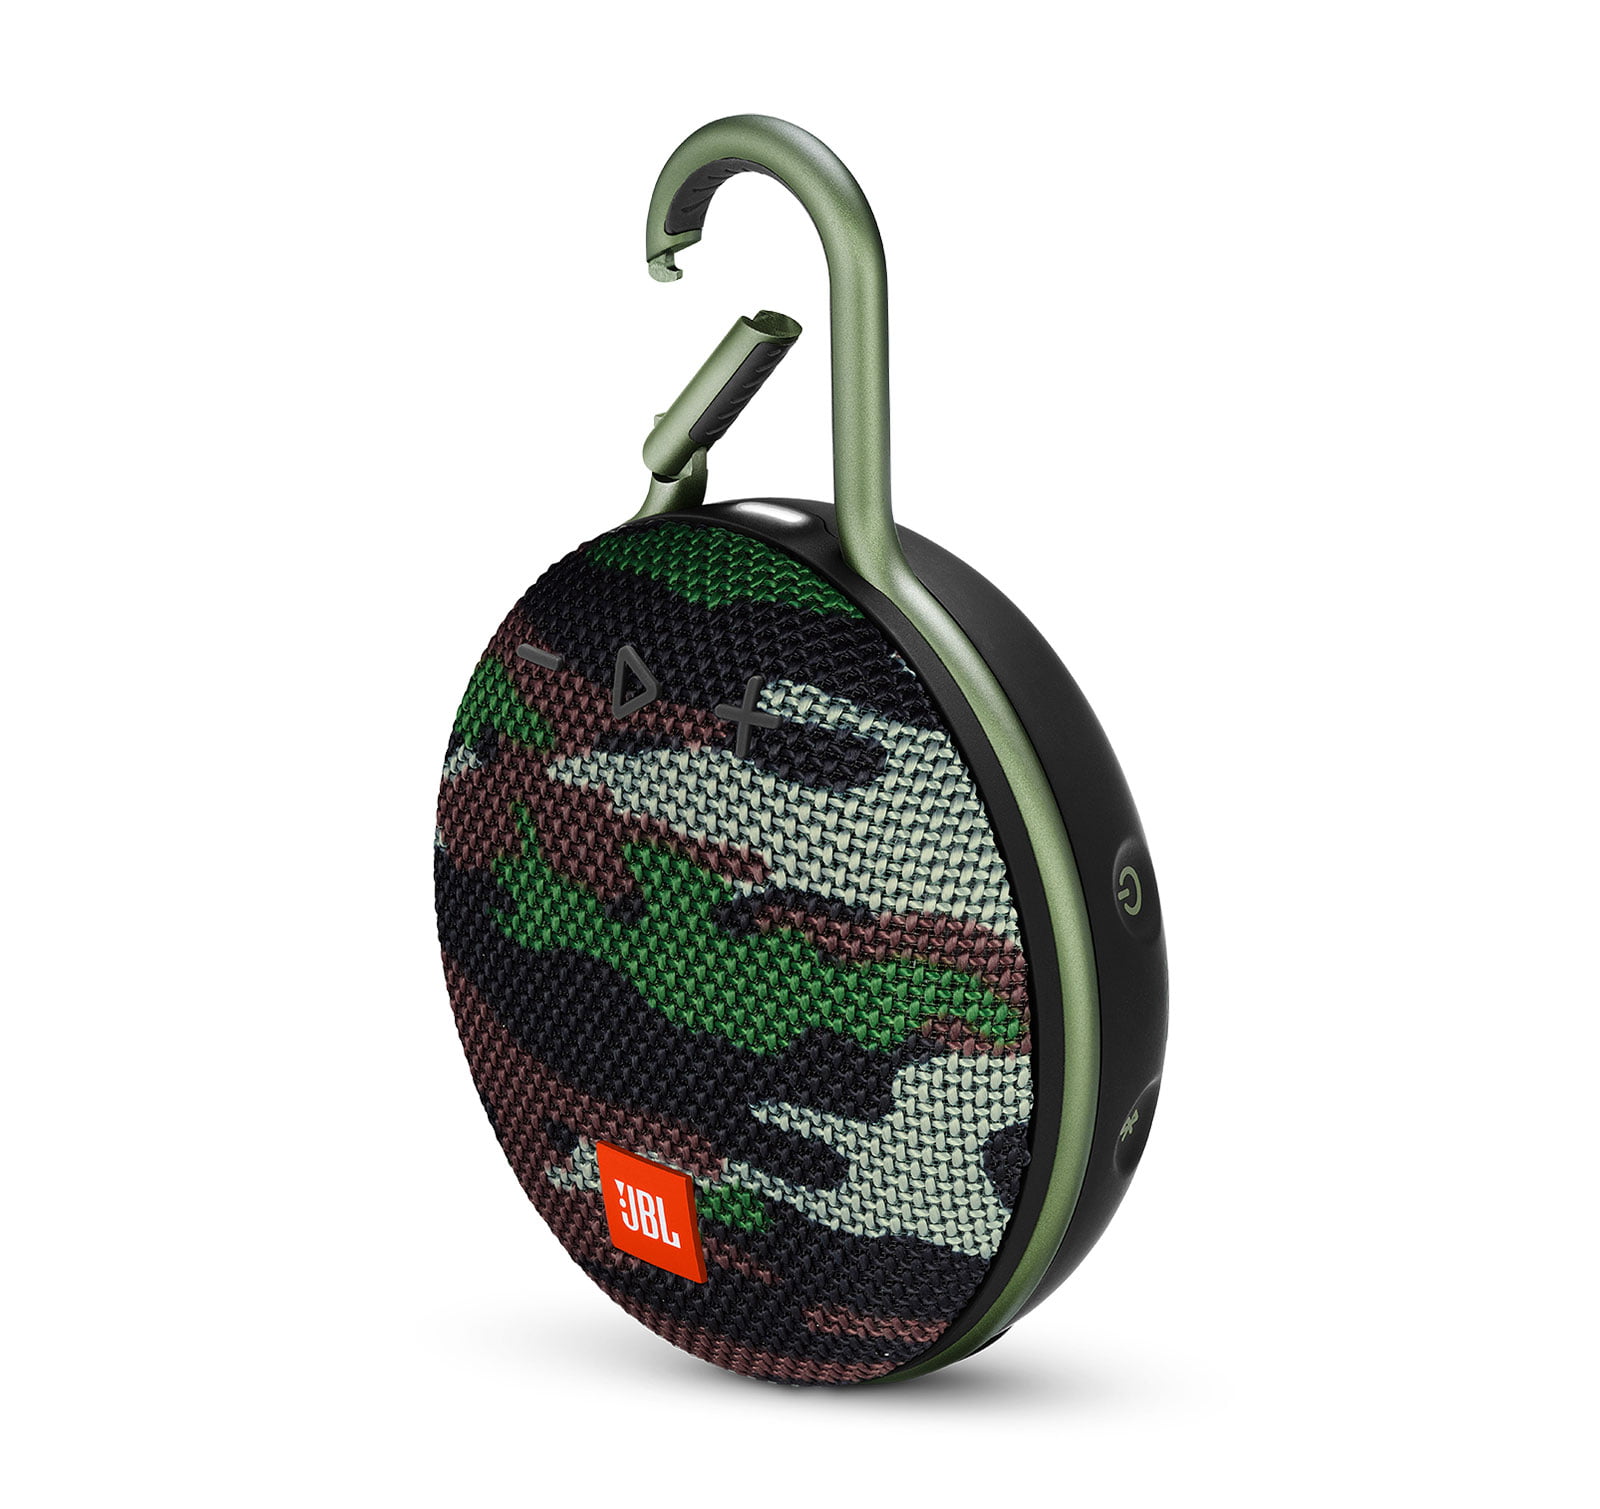 JBL Clip 3 Camouflage and Black Camo Portable Bluetooth Speaker